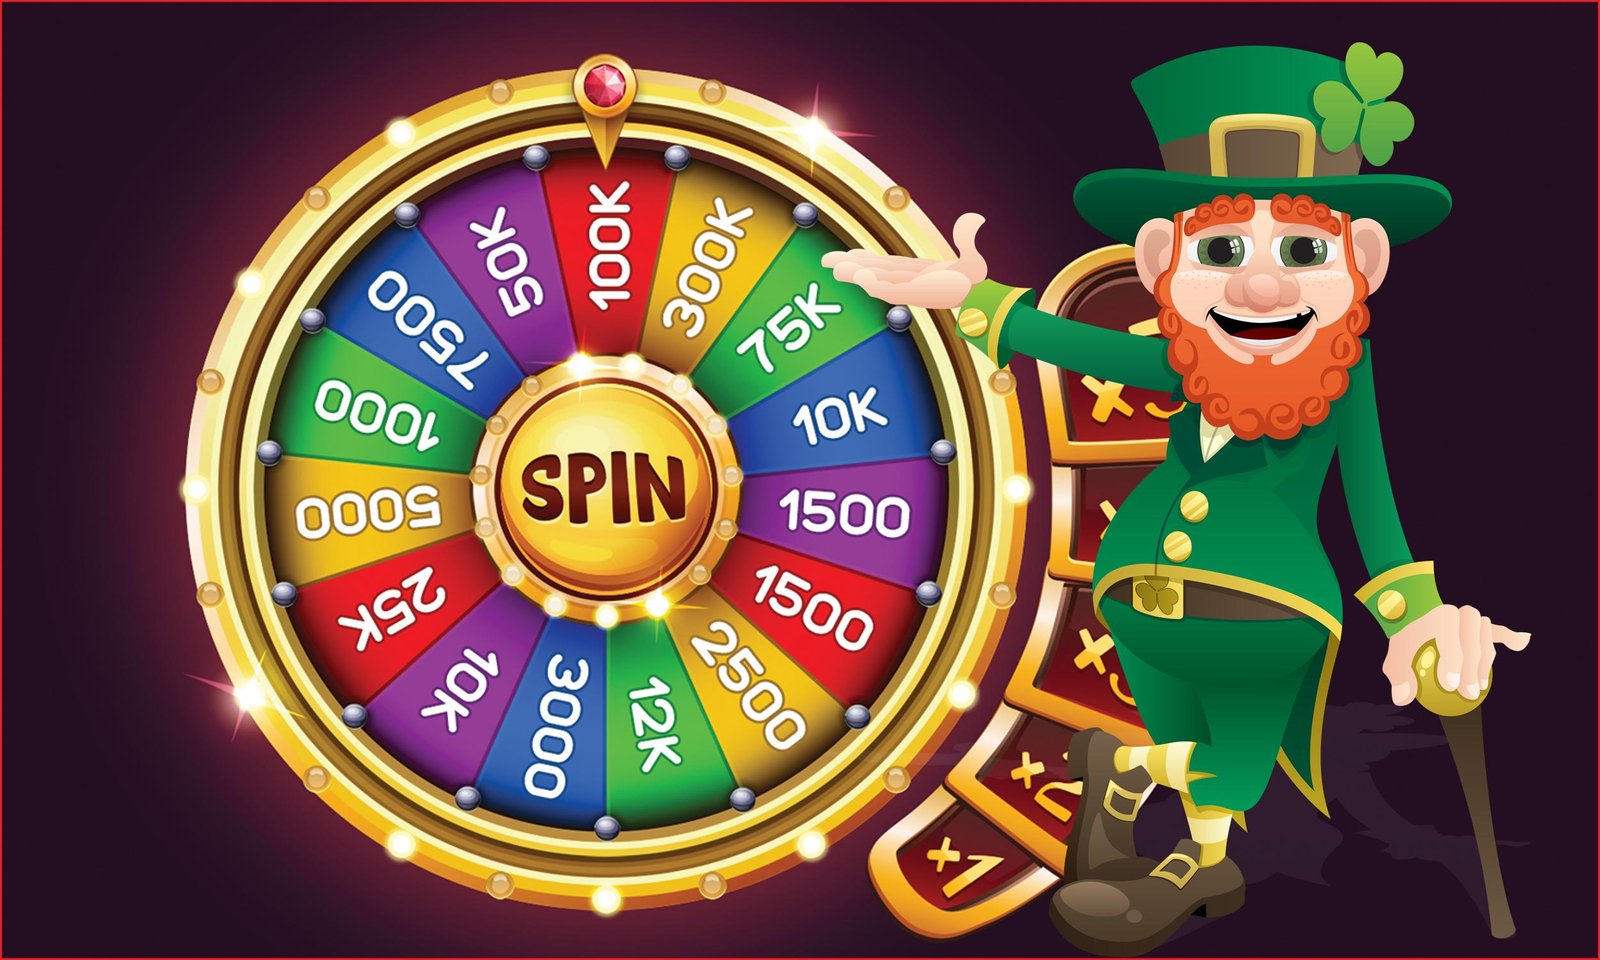 How Do You Get Free Spins on Spin Casino?